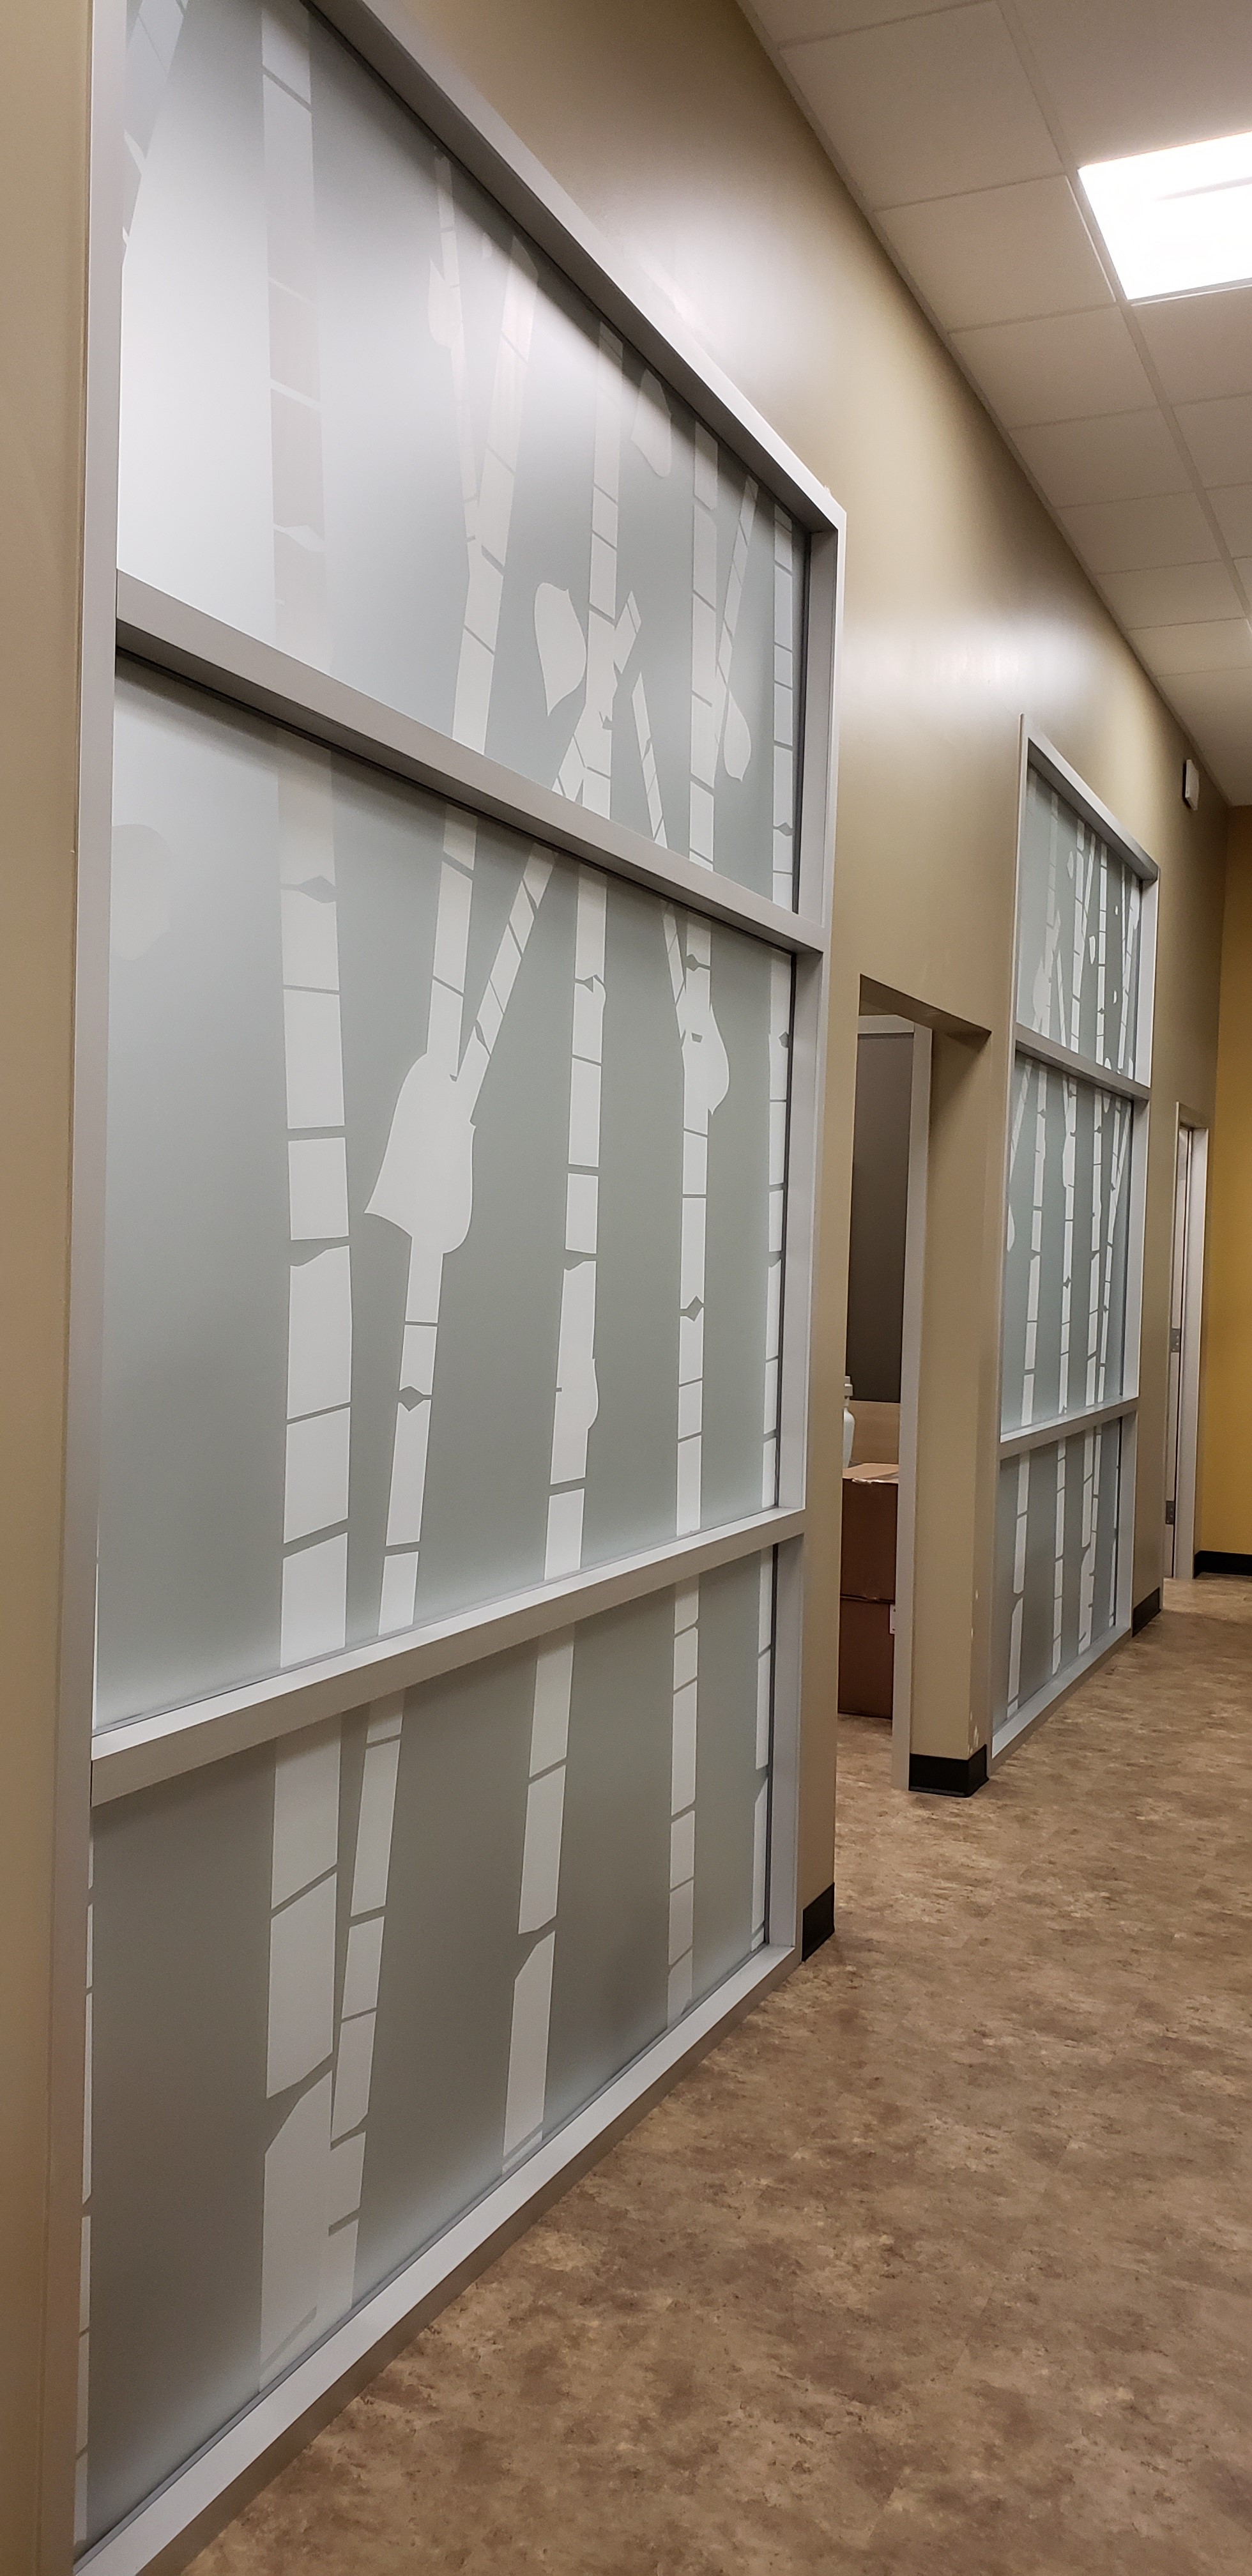 Bamboo patterened frosted glass